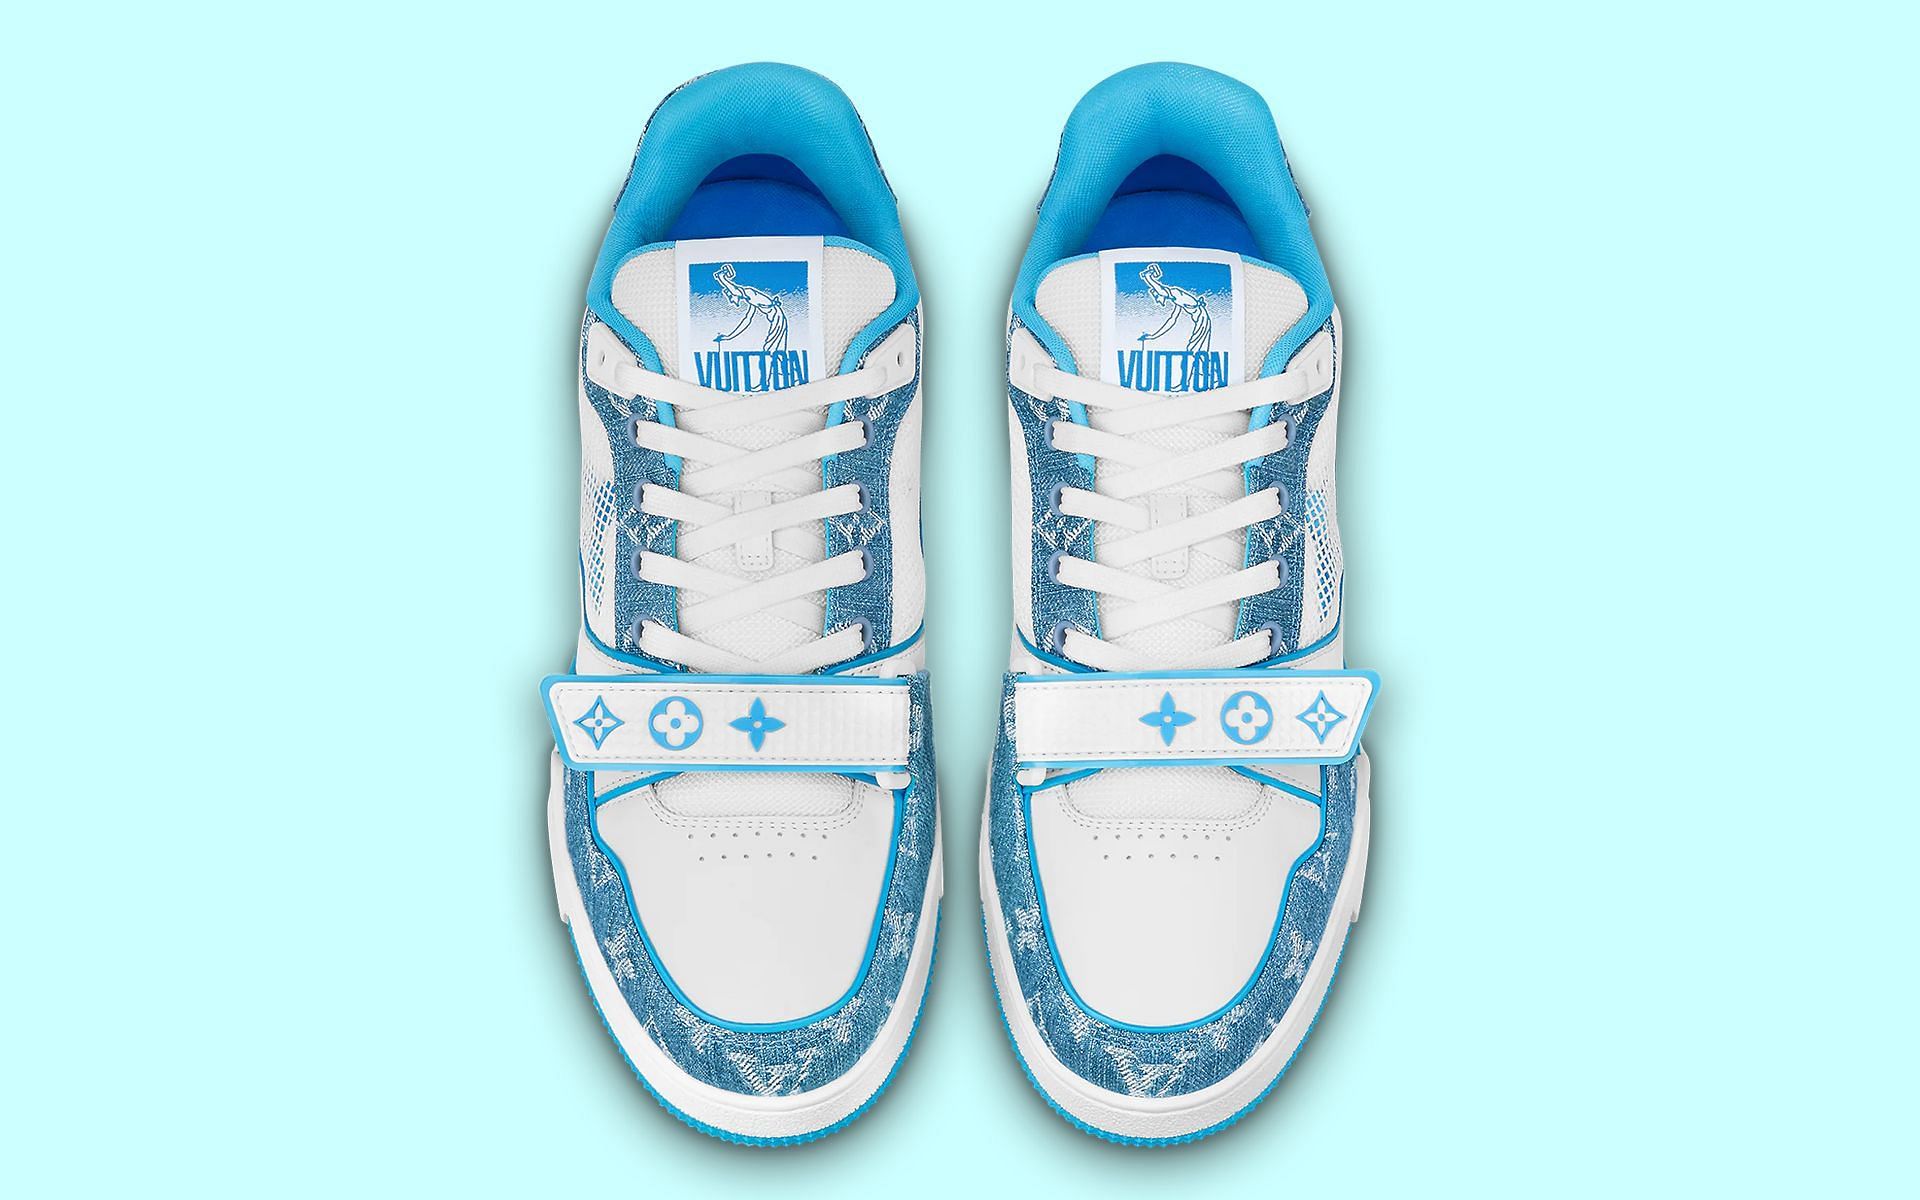 Where to buy LV trainer sneakers in denim blue monogram? Price and